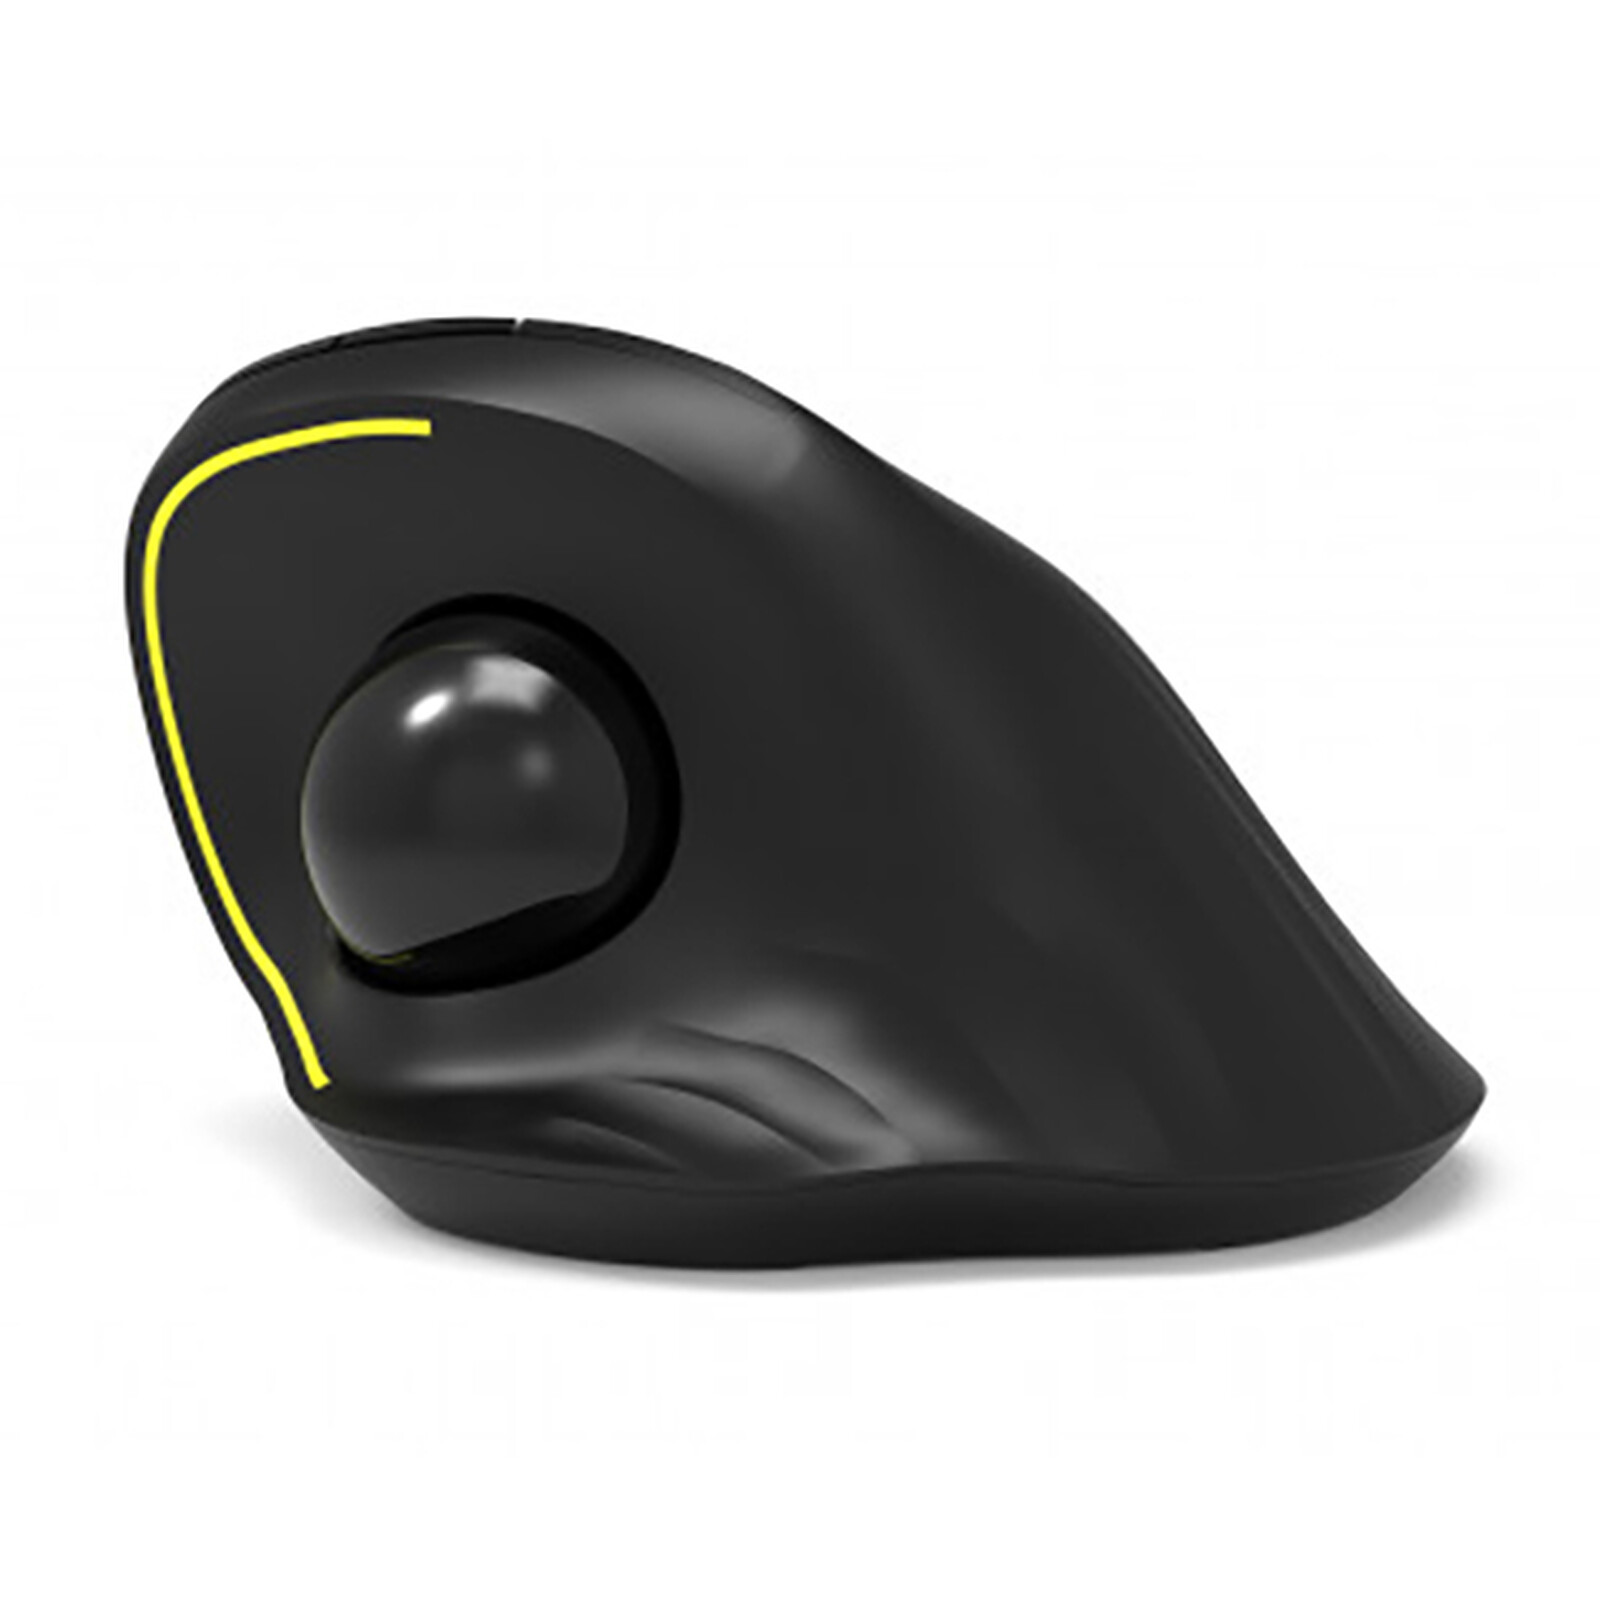 Port Designs Bluetooth wireless & rechargeable ergonomic mouse